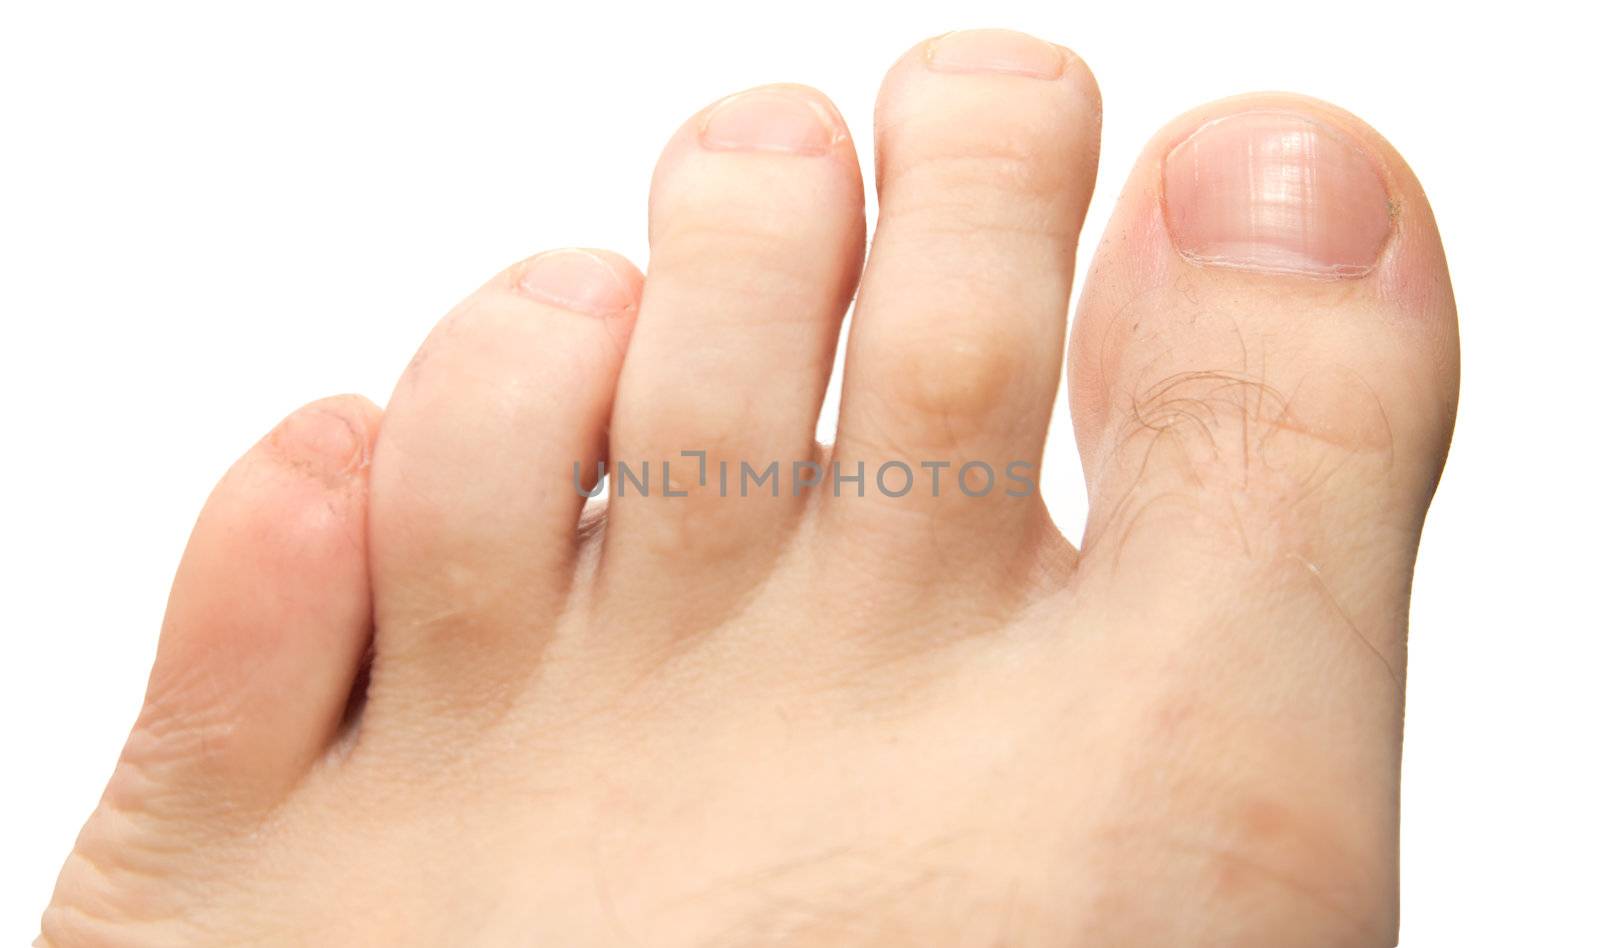 men's toes on a white background by schankz